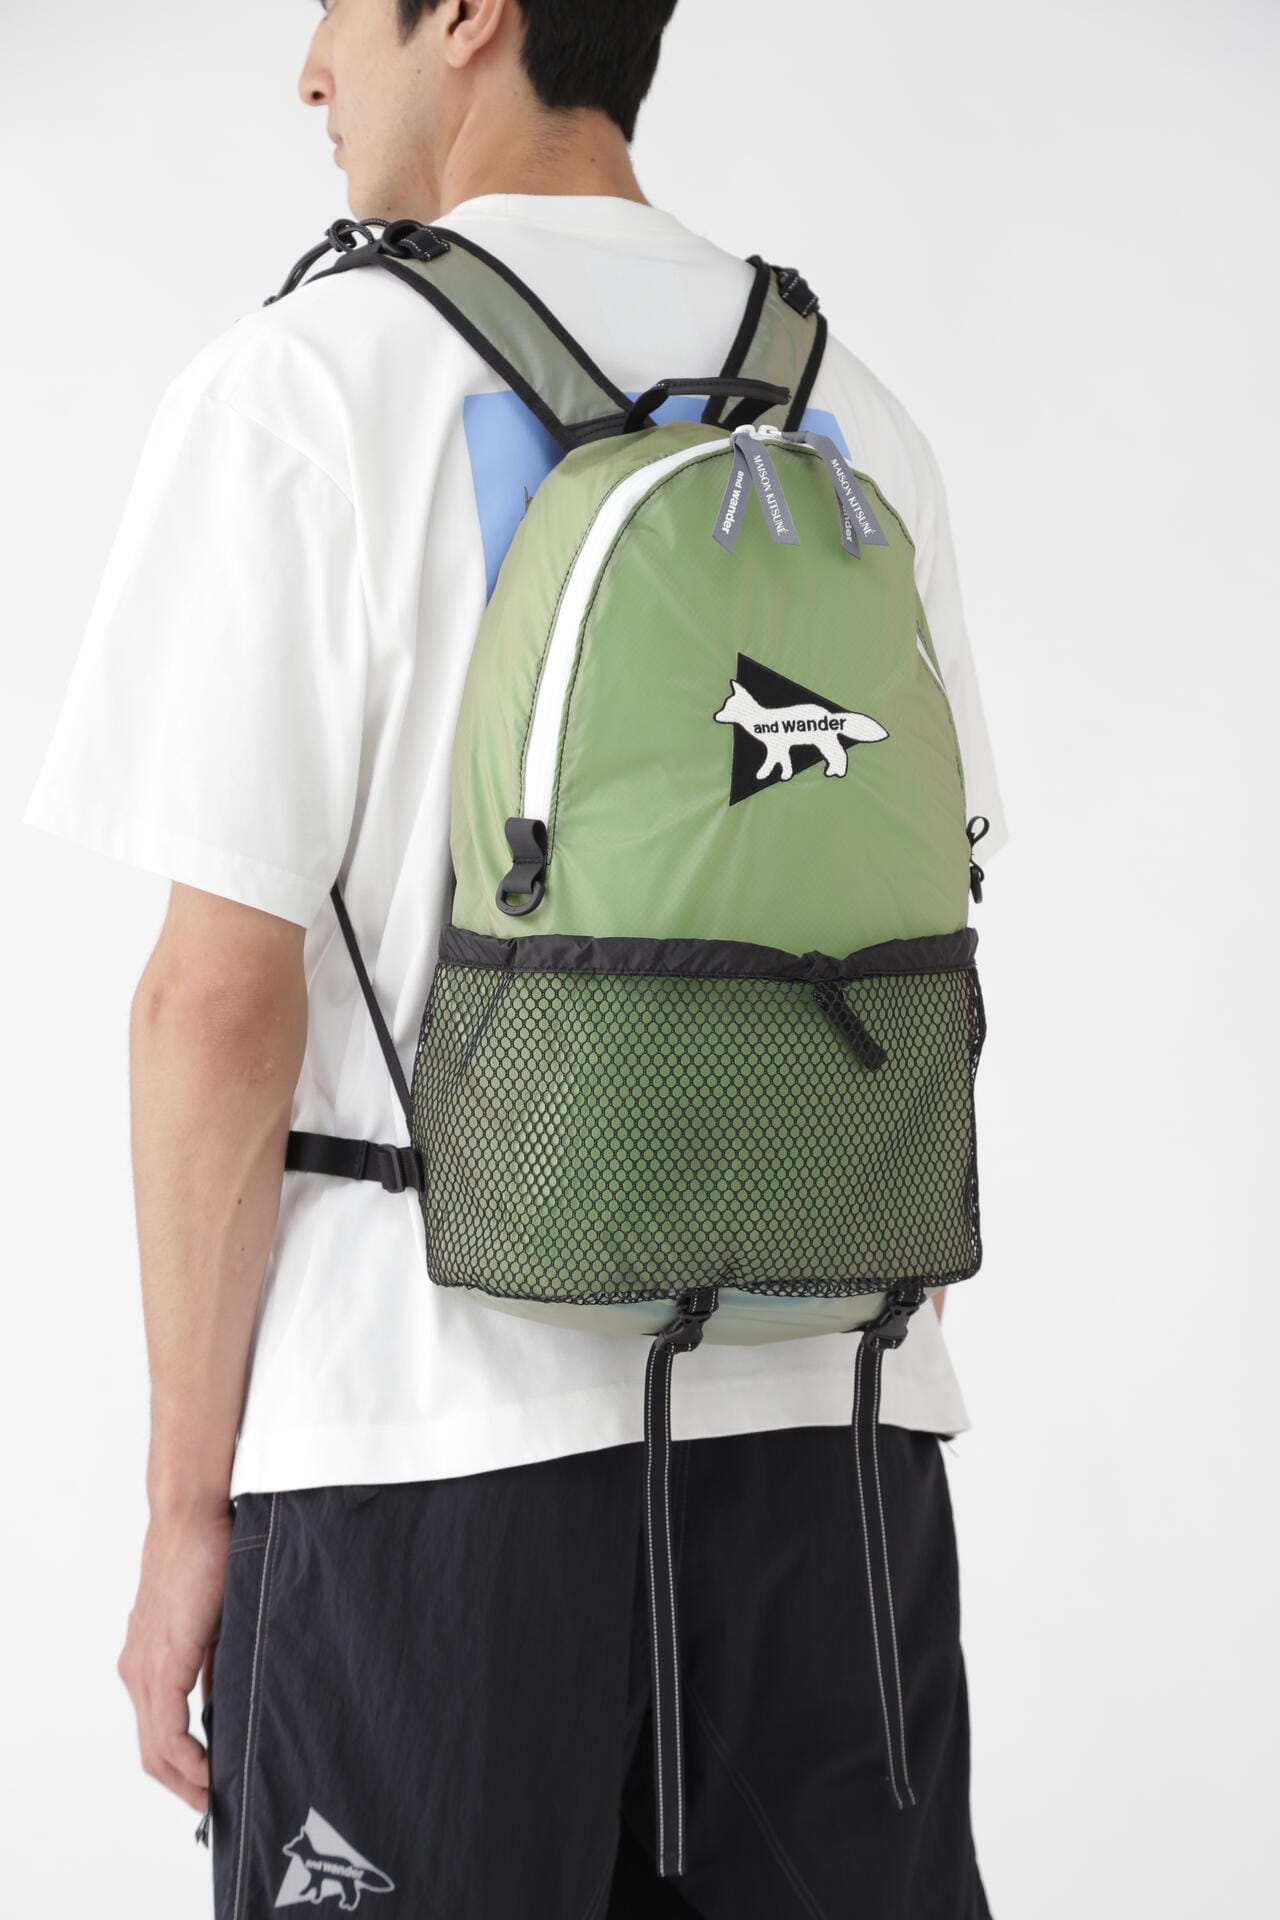 MAISON KITSUNÉ × and wander SIL NYLON 20L DAYPACK | backpack | and 